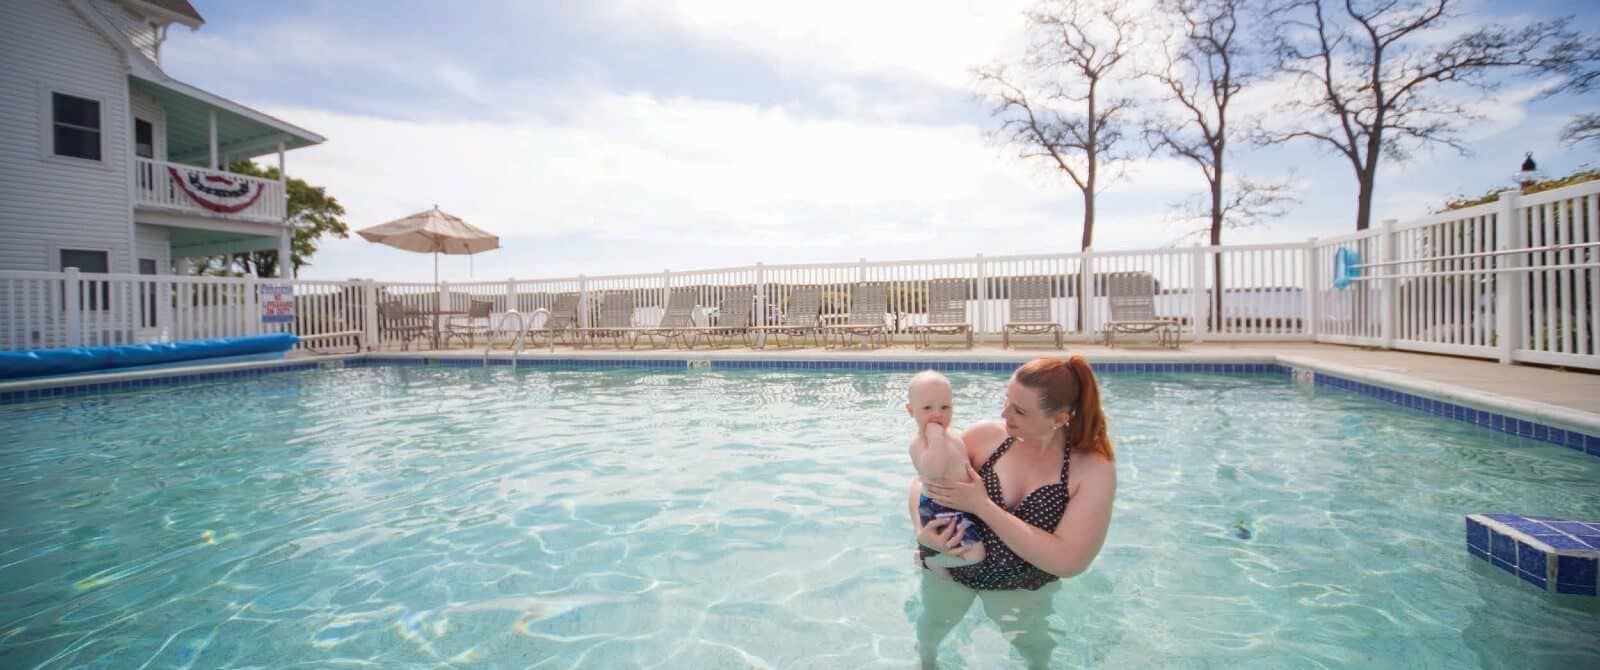 A woman holding a baby in a large outdoor pool next to a hotel building overlooking a lake